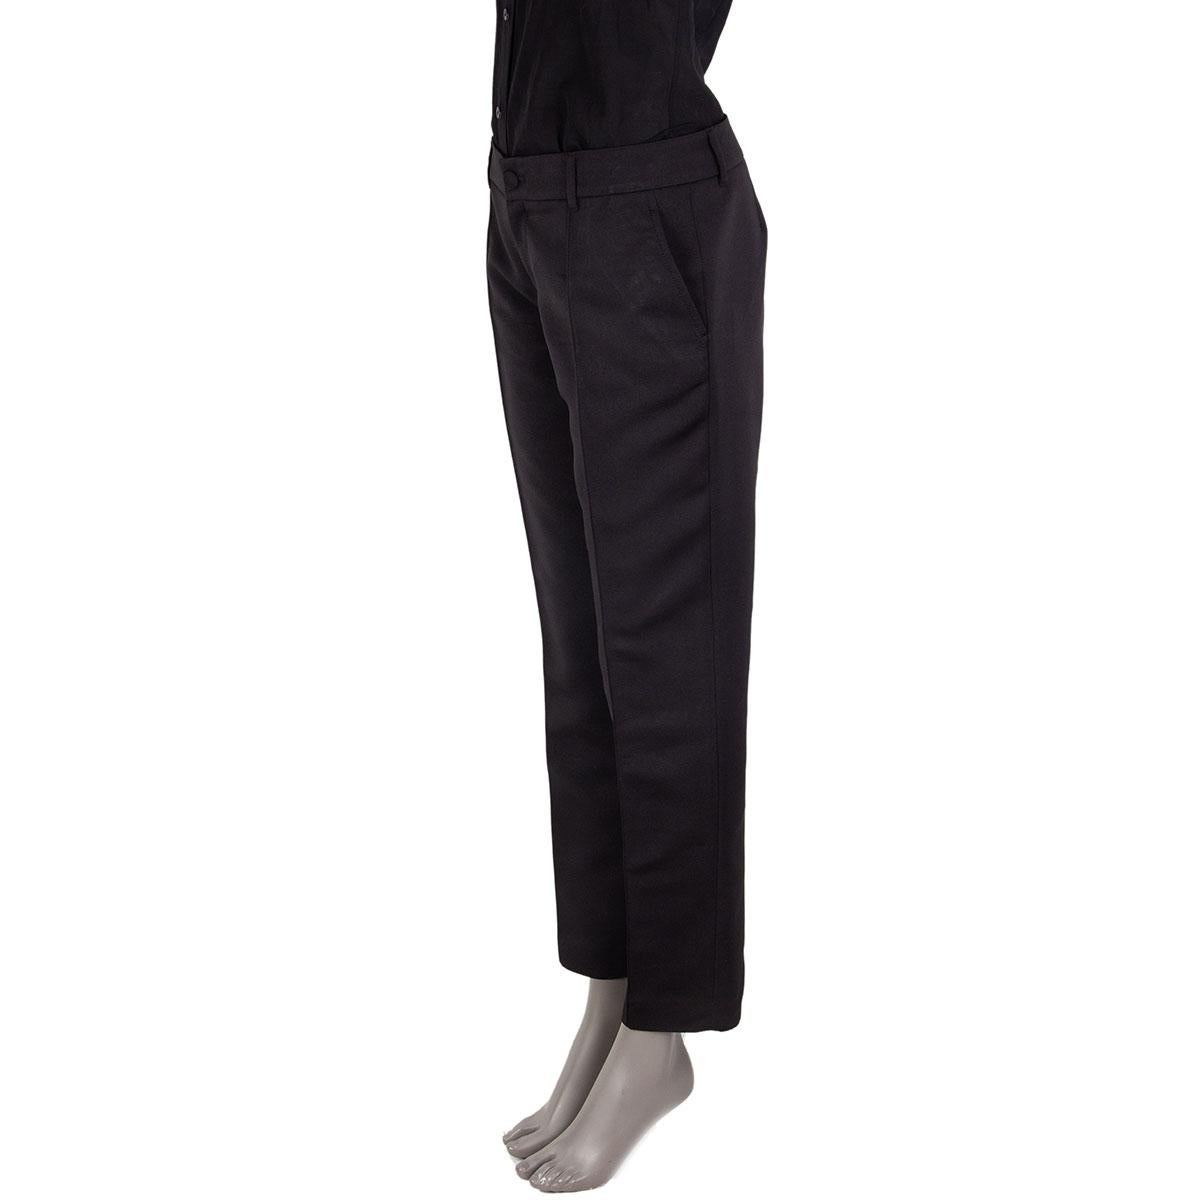 100% authentic Gucci classic tapered pants in black silk (64%) and polyamide (36%) with slit pockets. Close on the front with a zipper and button. Unlined. Have been worn and are in excellent condition. 

Measurements
Tag Size	44
Size	L
Waist